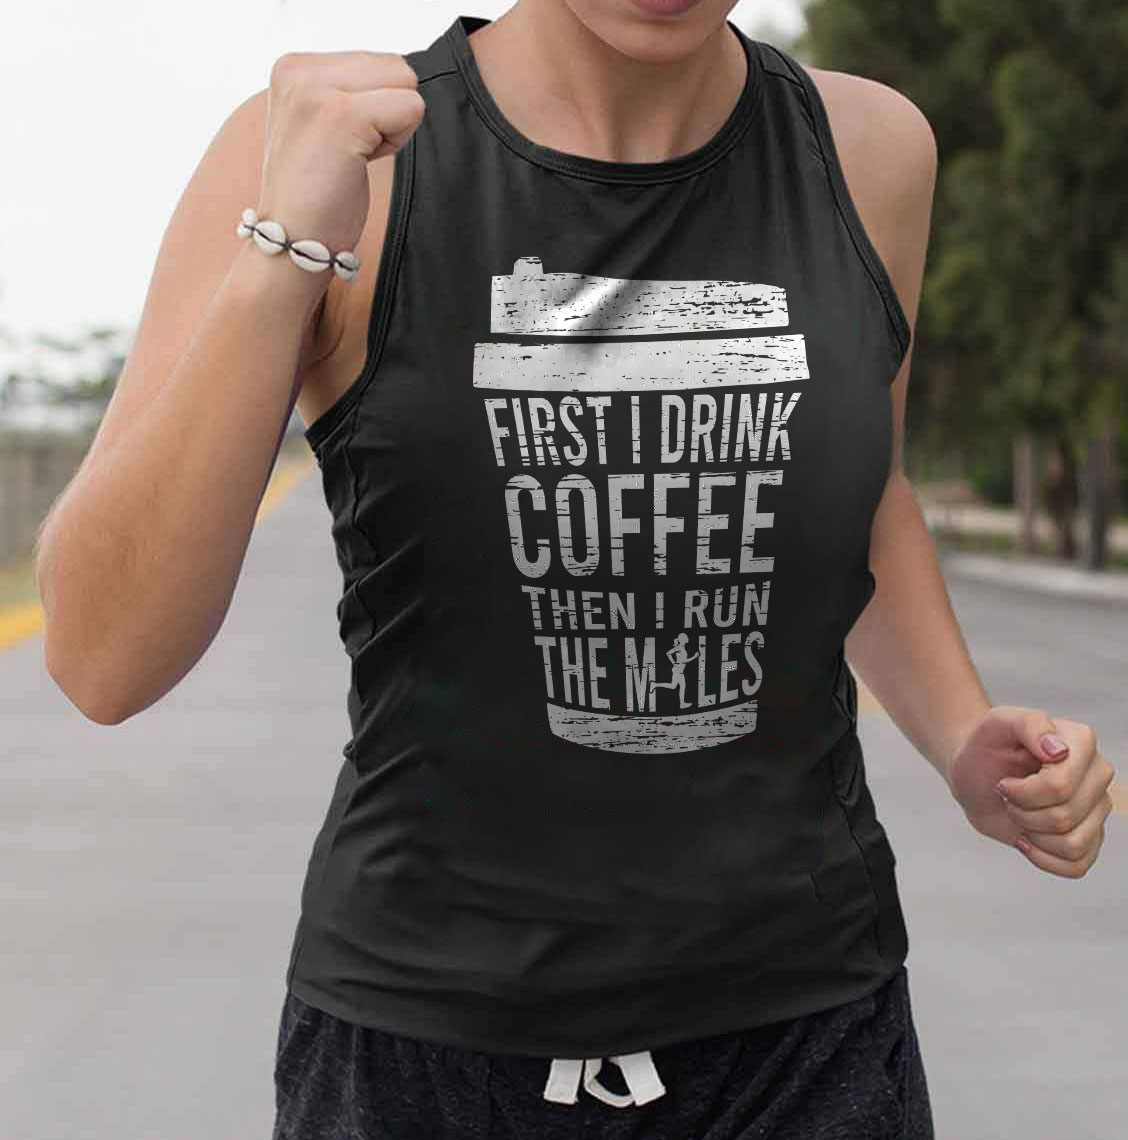 First I drink coffee then I run the miles - Coffee lover, coffee and running